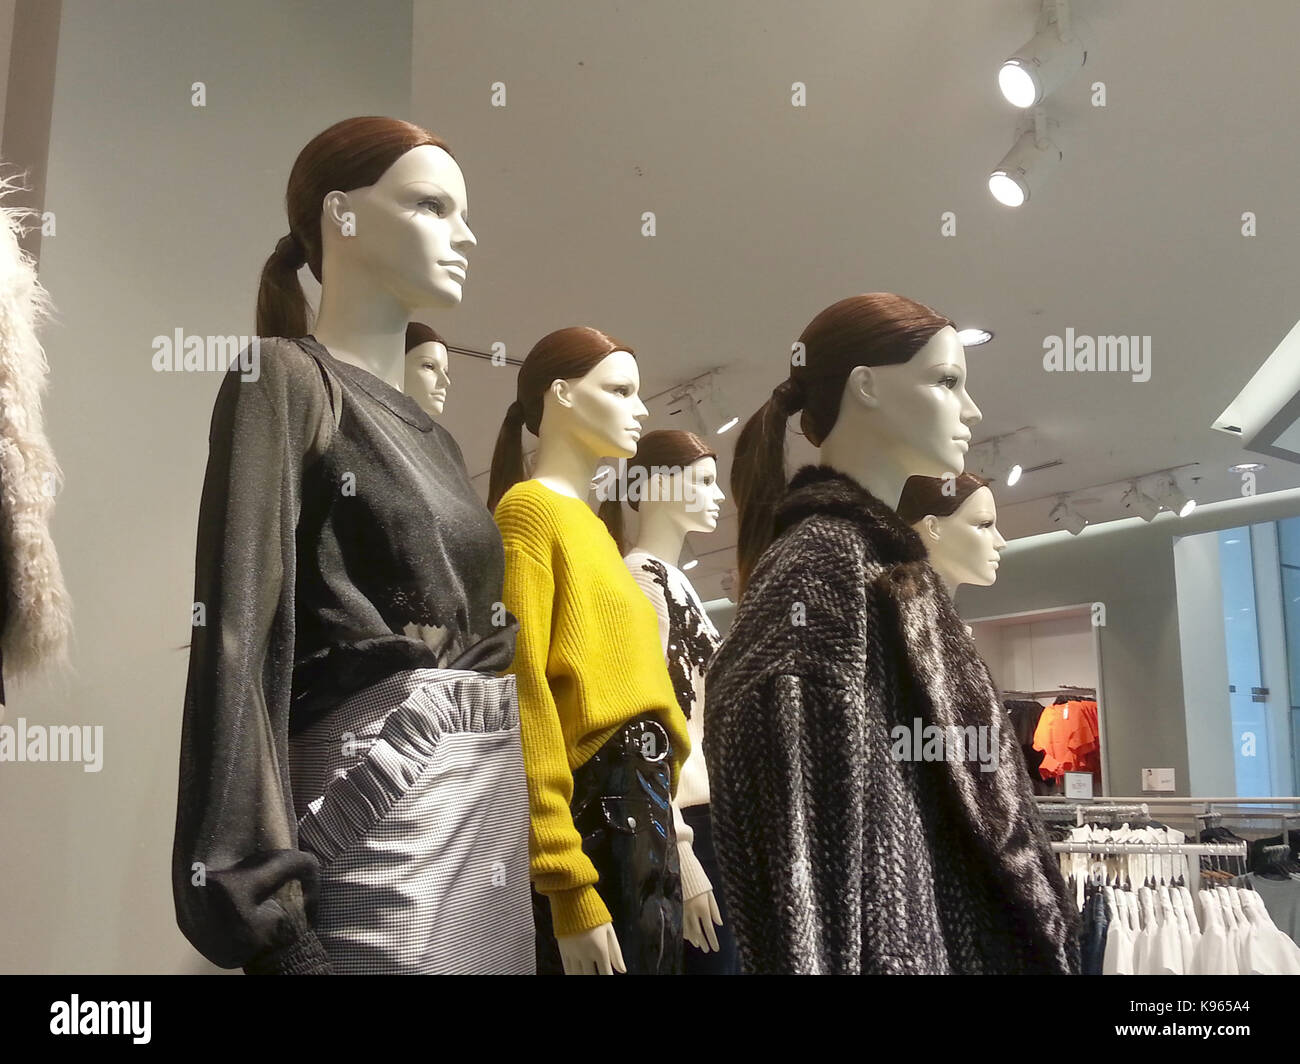 Mannequins On Display In The Shop With New Fashion In Shopping Gallery K965A4 